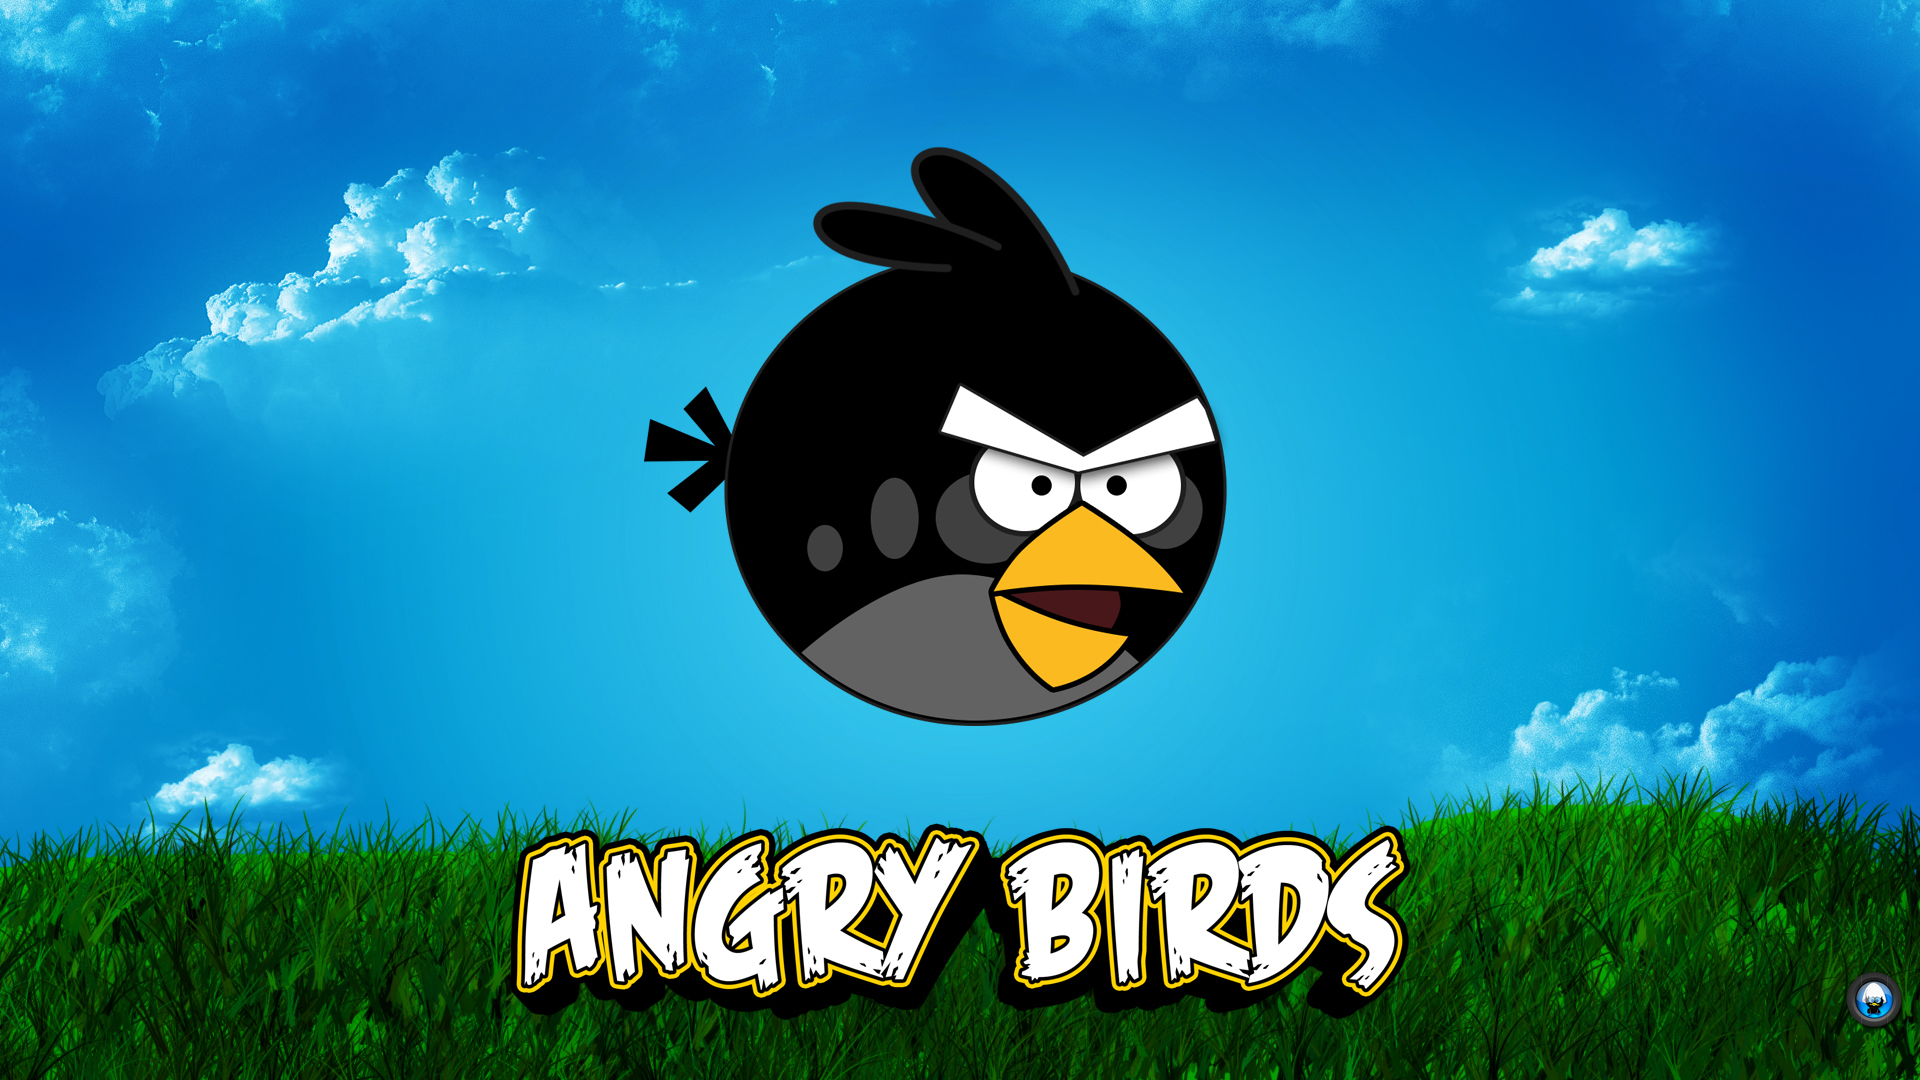 Free download Angry Birds Red Bird Game Games 1920x1080 [1920x1080] for your Desktop, Mobile & Tablet. Explore Angry Bird Wallpaper. Angry Bird Wallpaper, Angry Bird Wallpaper Border, Angry Bird